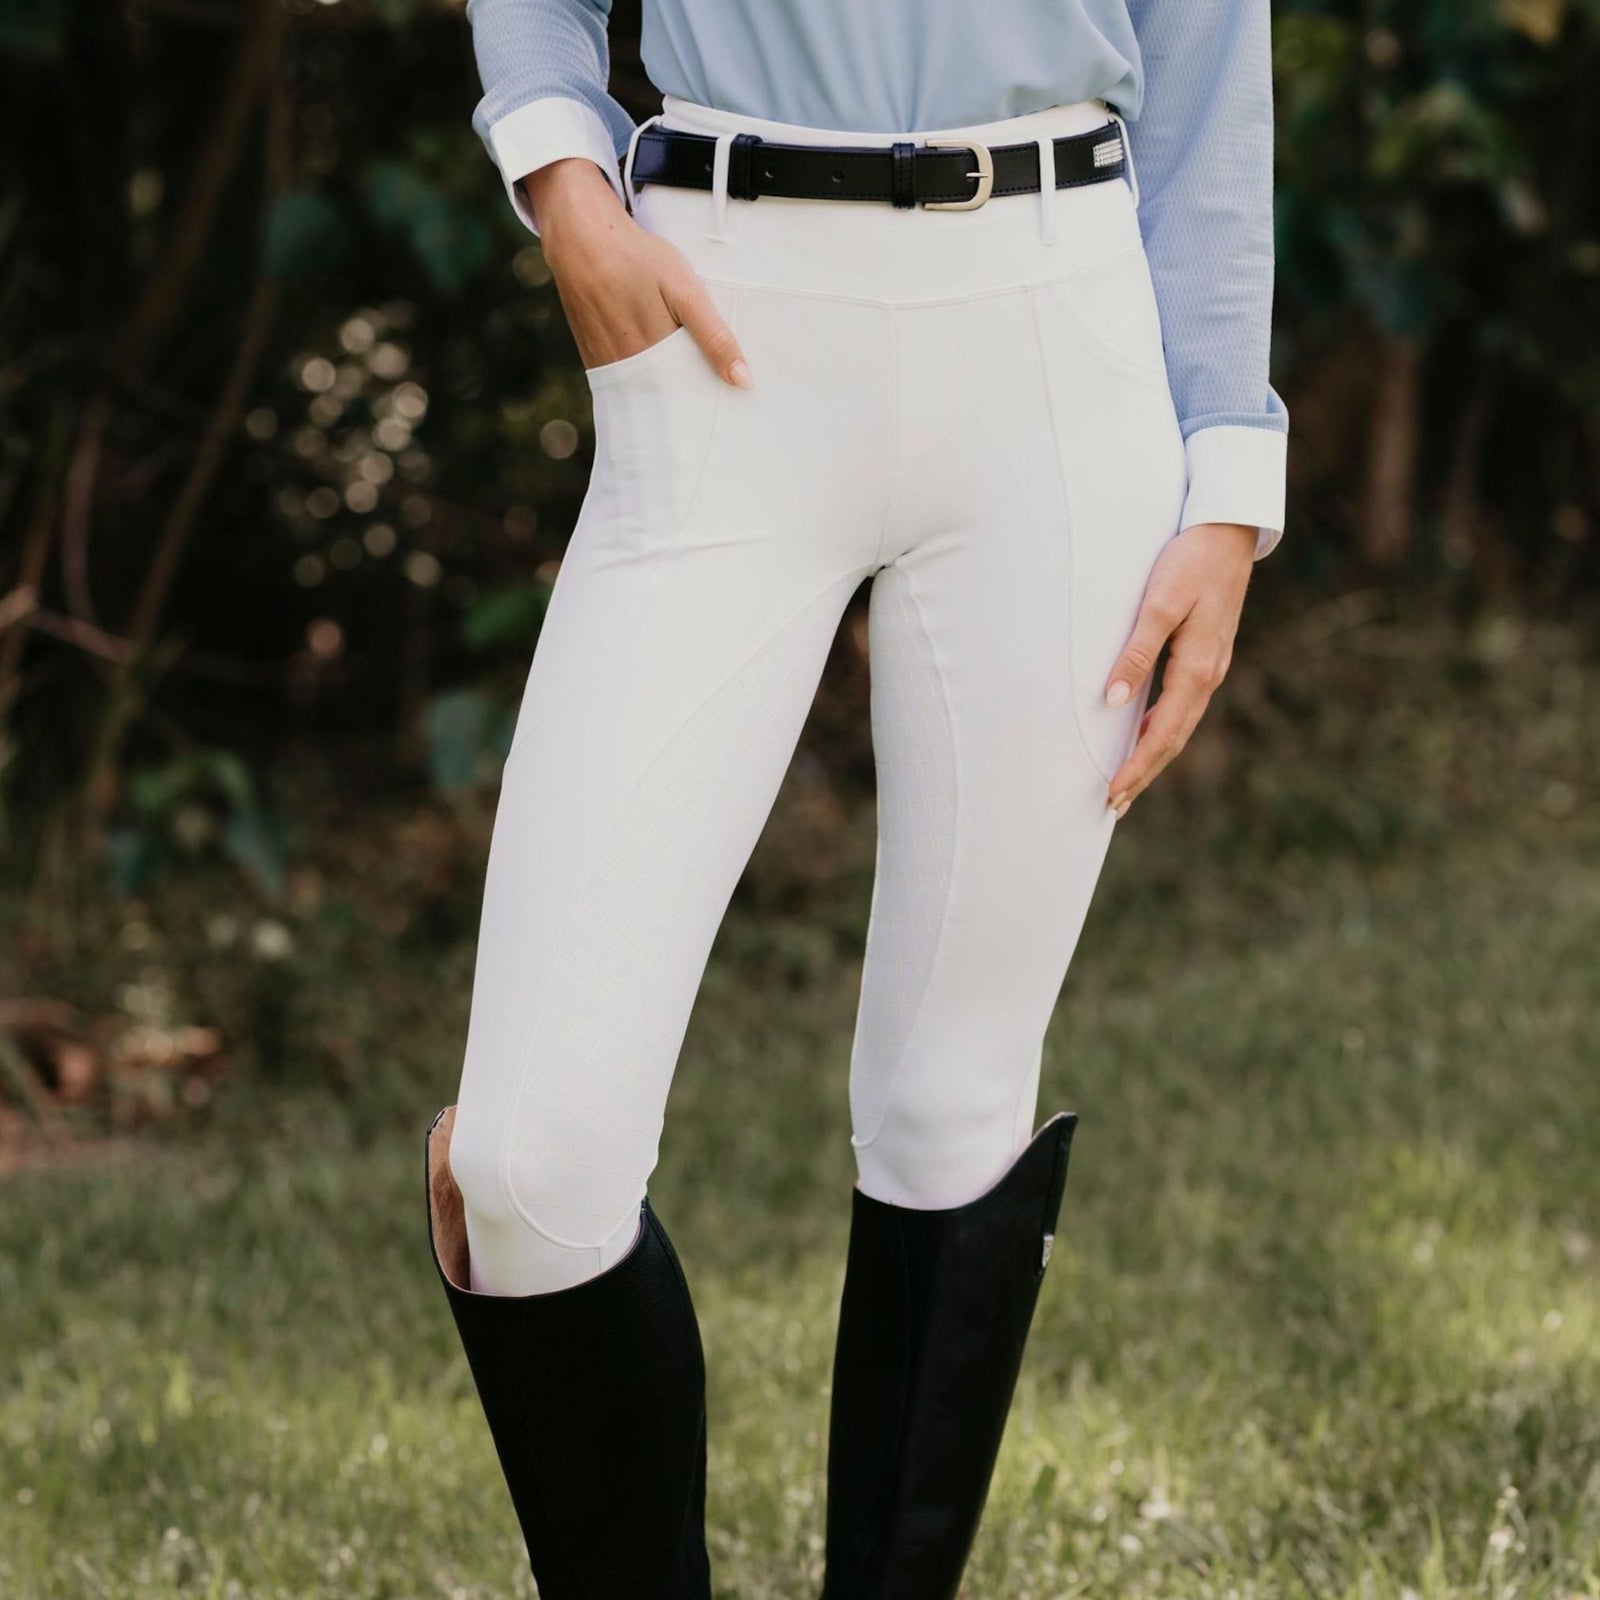 PERFORMANCE RIDING BREECHES FULL GRIP, 42% OFF